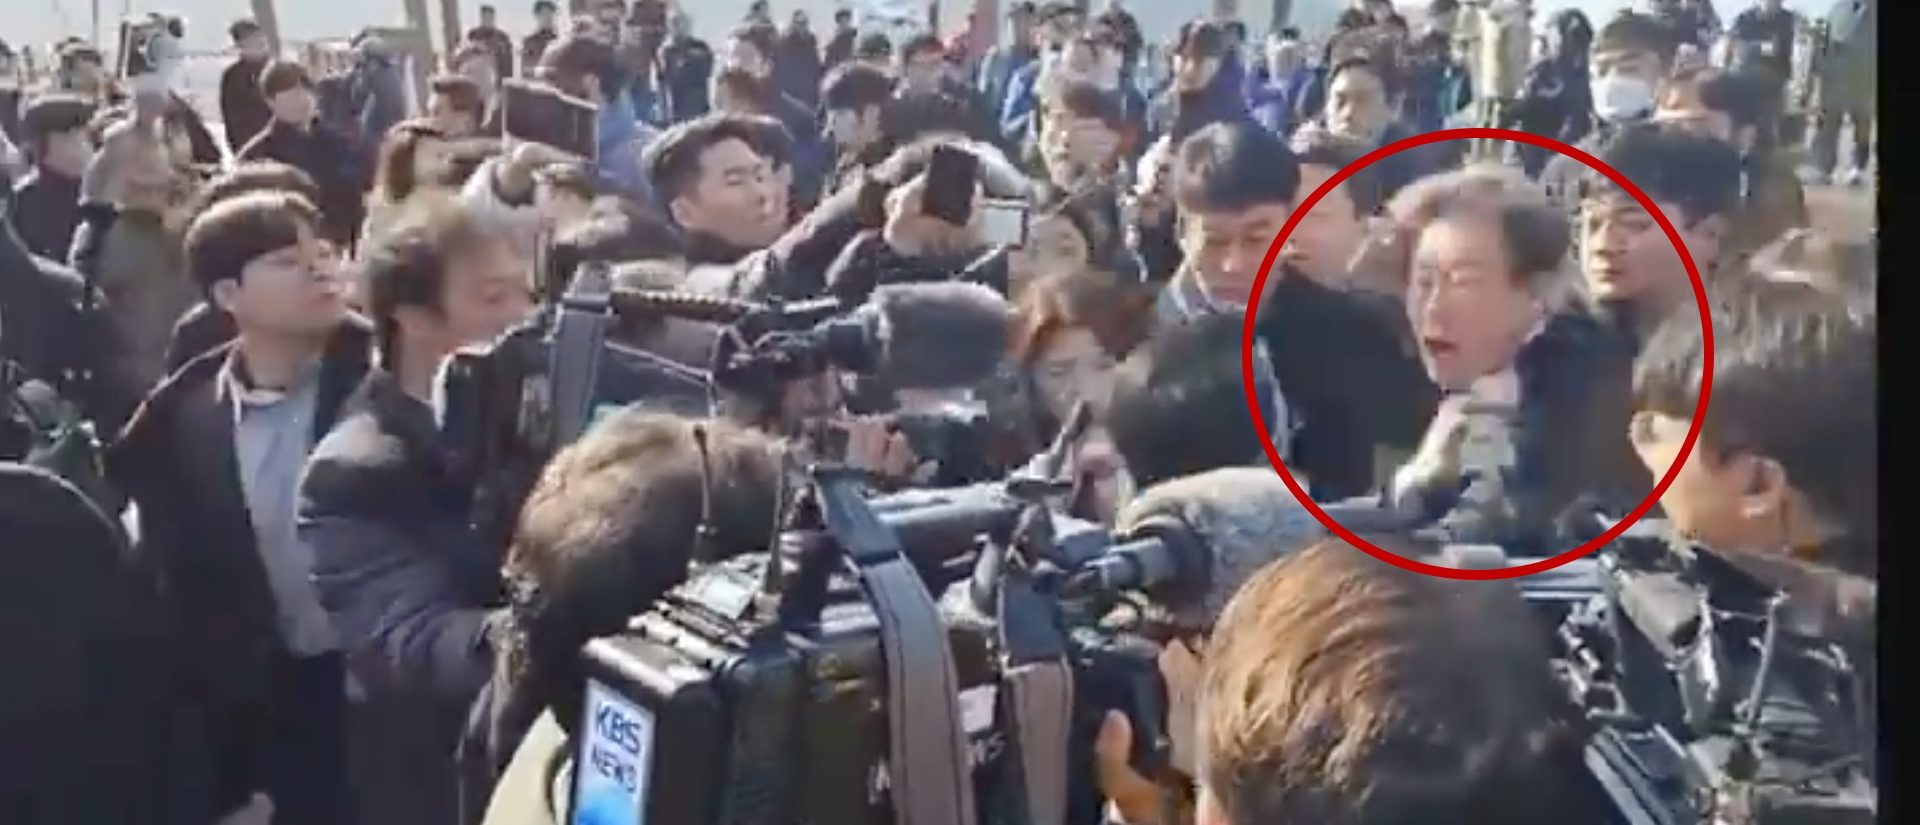 Video Appears To Show South Korean Opposition Leader Getting Stabbed In The Neck During Tour Site Visit